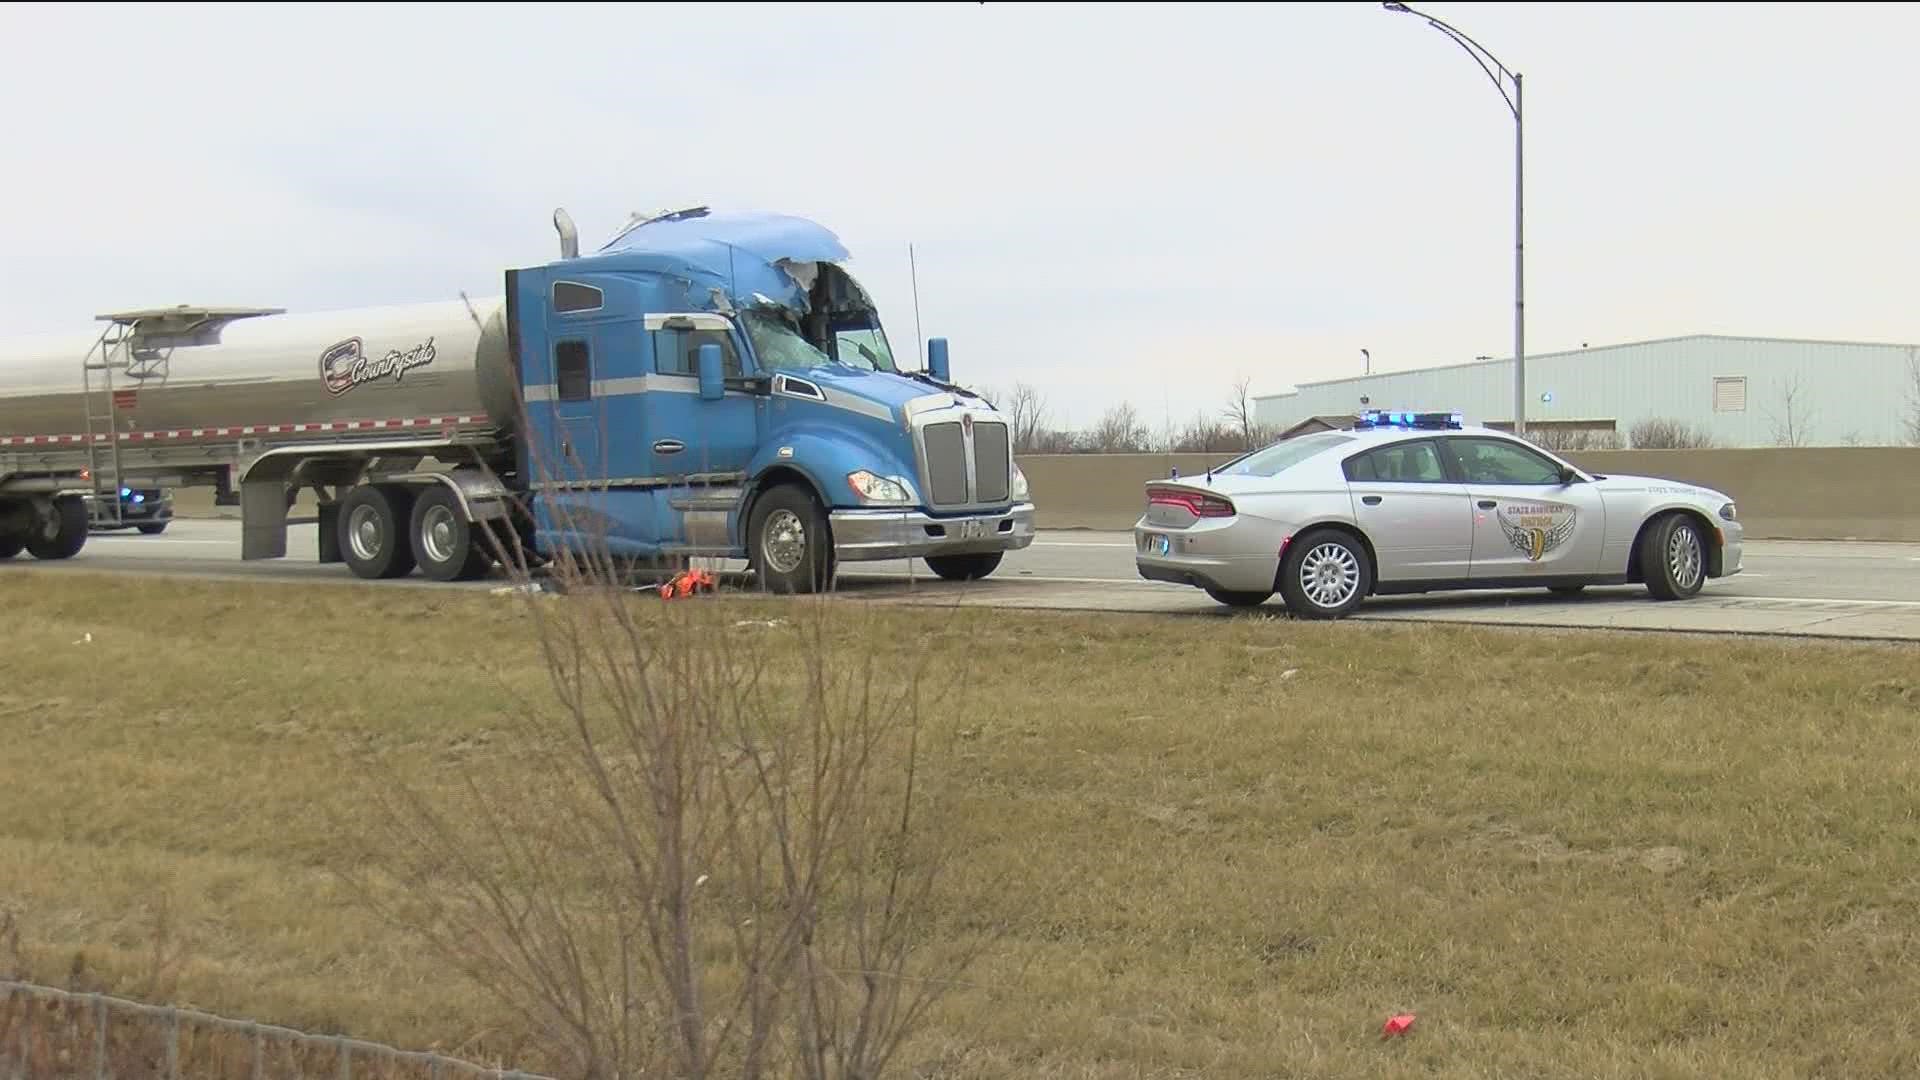 A southbound truck lost tires on I-280 Tuesday afternoon. The tires crossed the median and collided with the cab of a tanker truck heading northbound in Lake Twp.